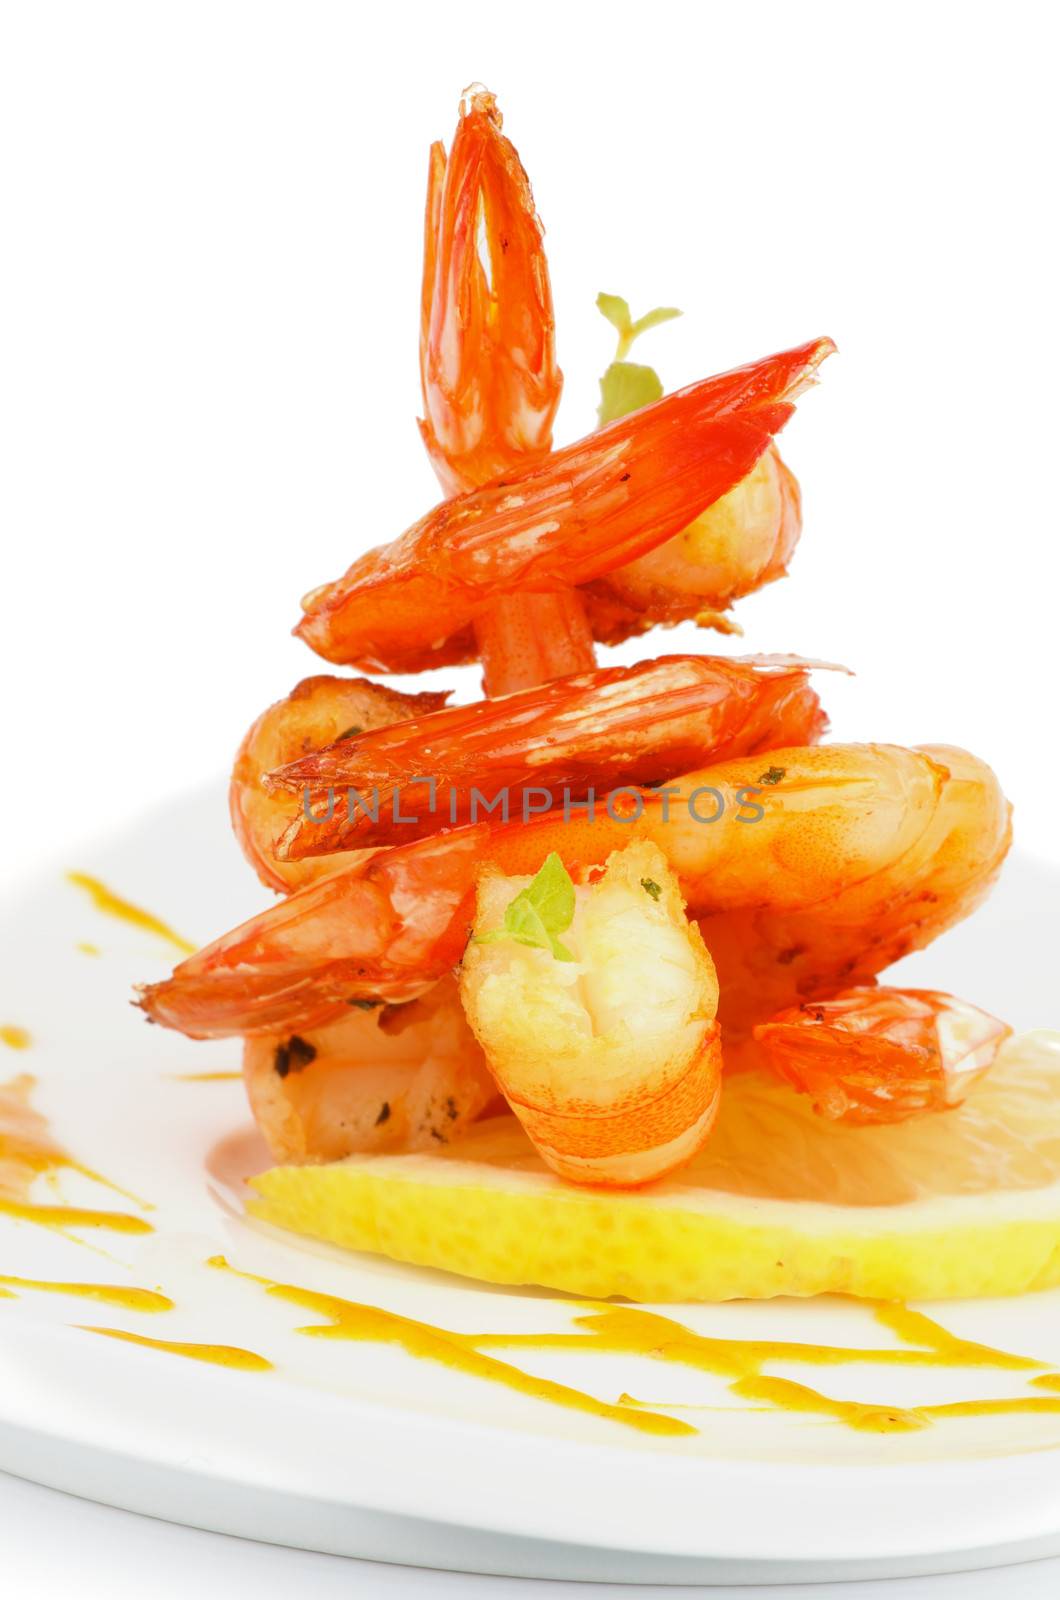 Gourmet Fried Shrimps Garnished with Lemon, Mustard Sauce and Thyme closeup on White plate isolated on white background